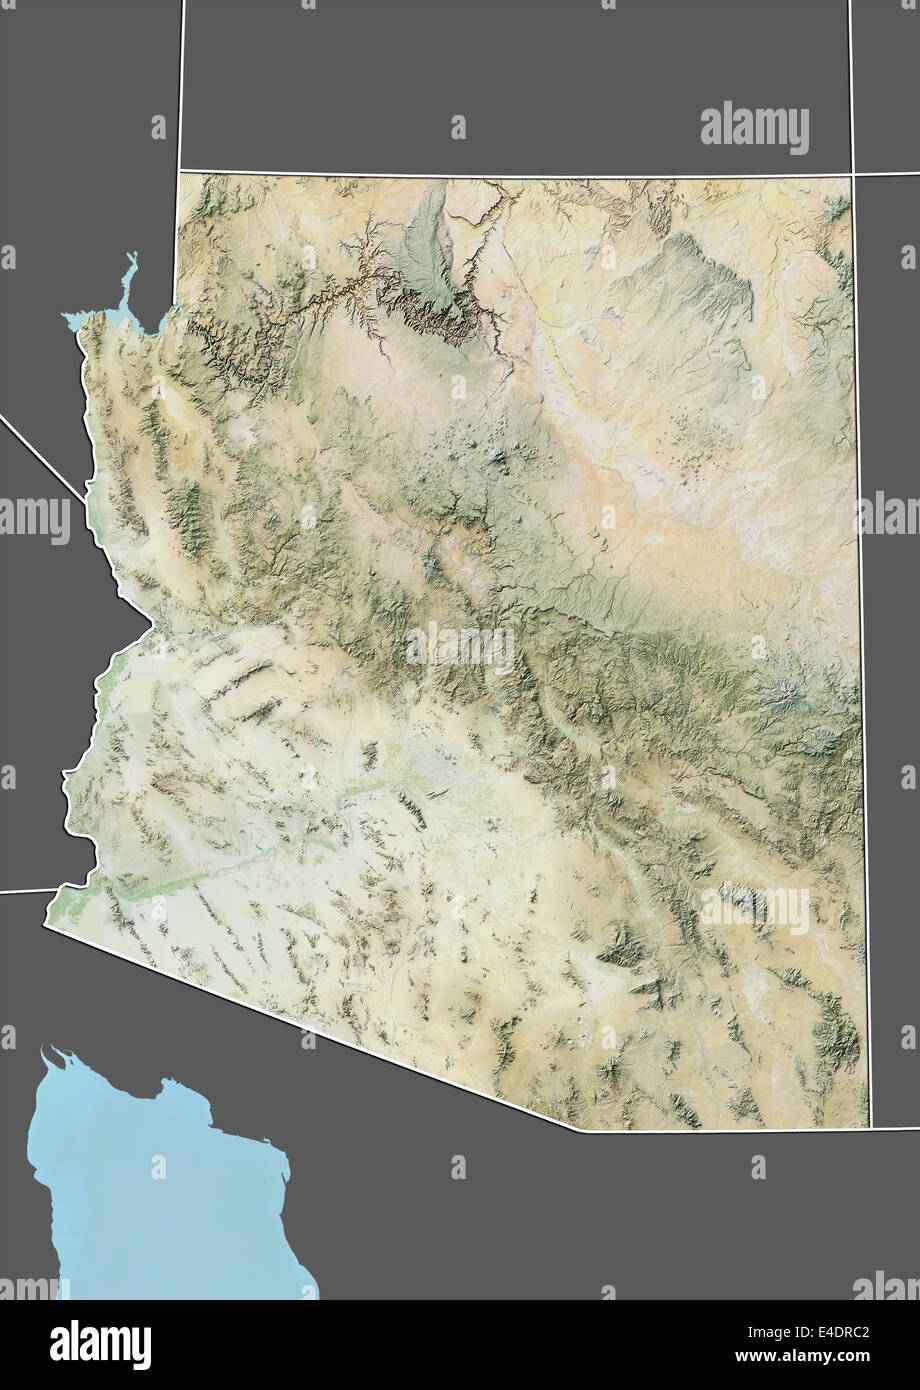 State of Arizona, United States, Relief Map Stock Photo